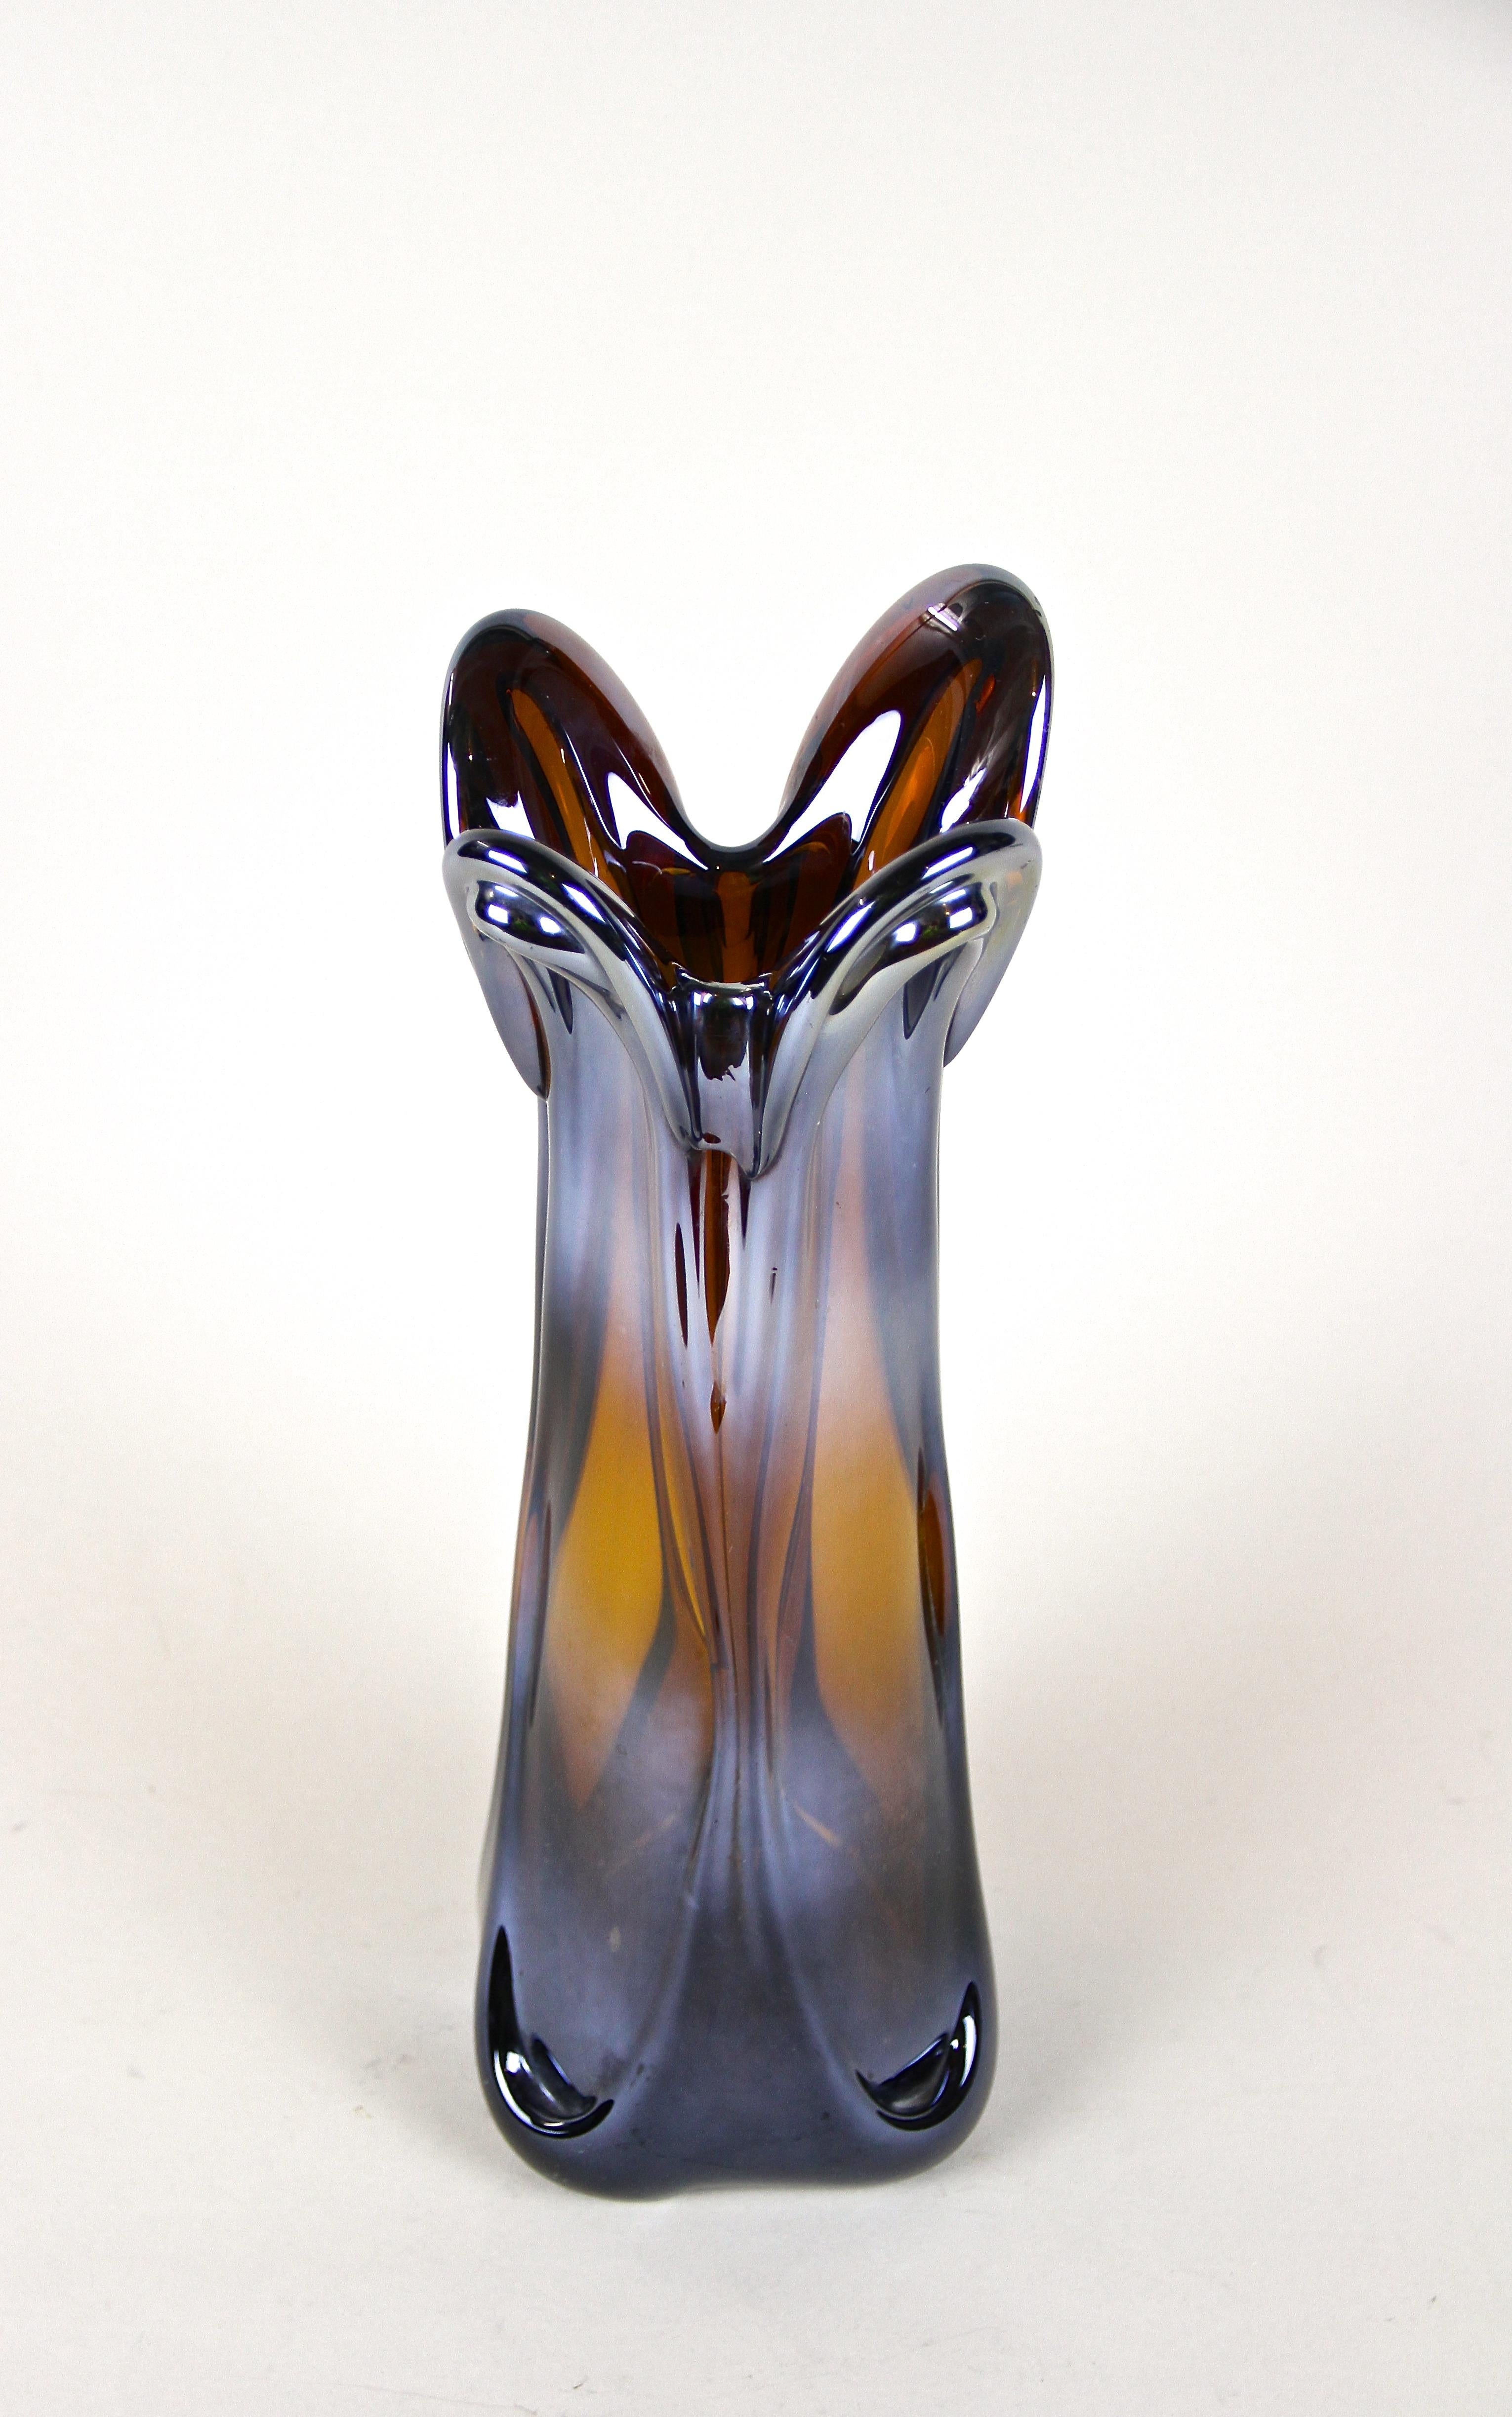 Iridiscent Murano Glass Vase Amber Colored with Chrome Effect, Italy circa 1970 For Sale 1